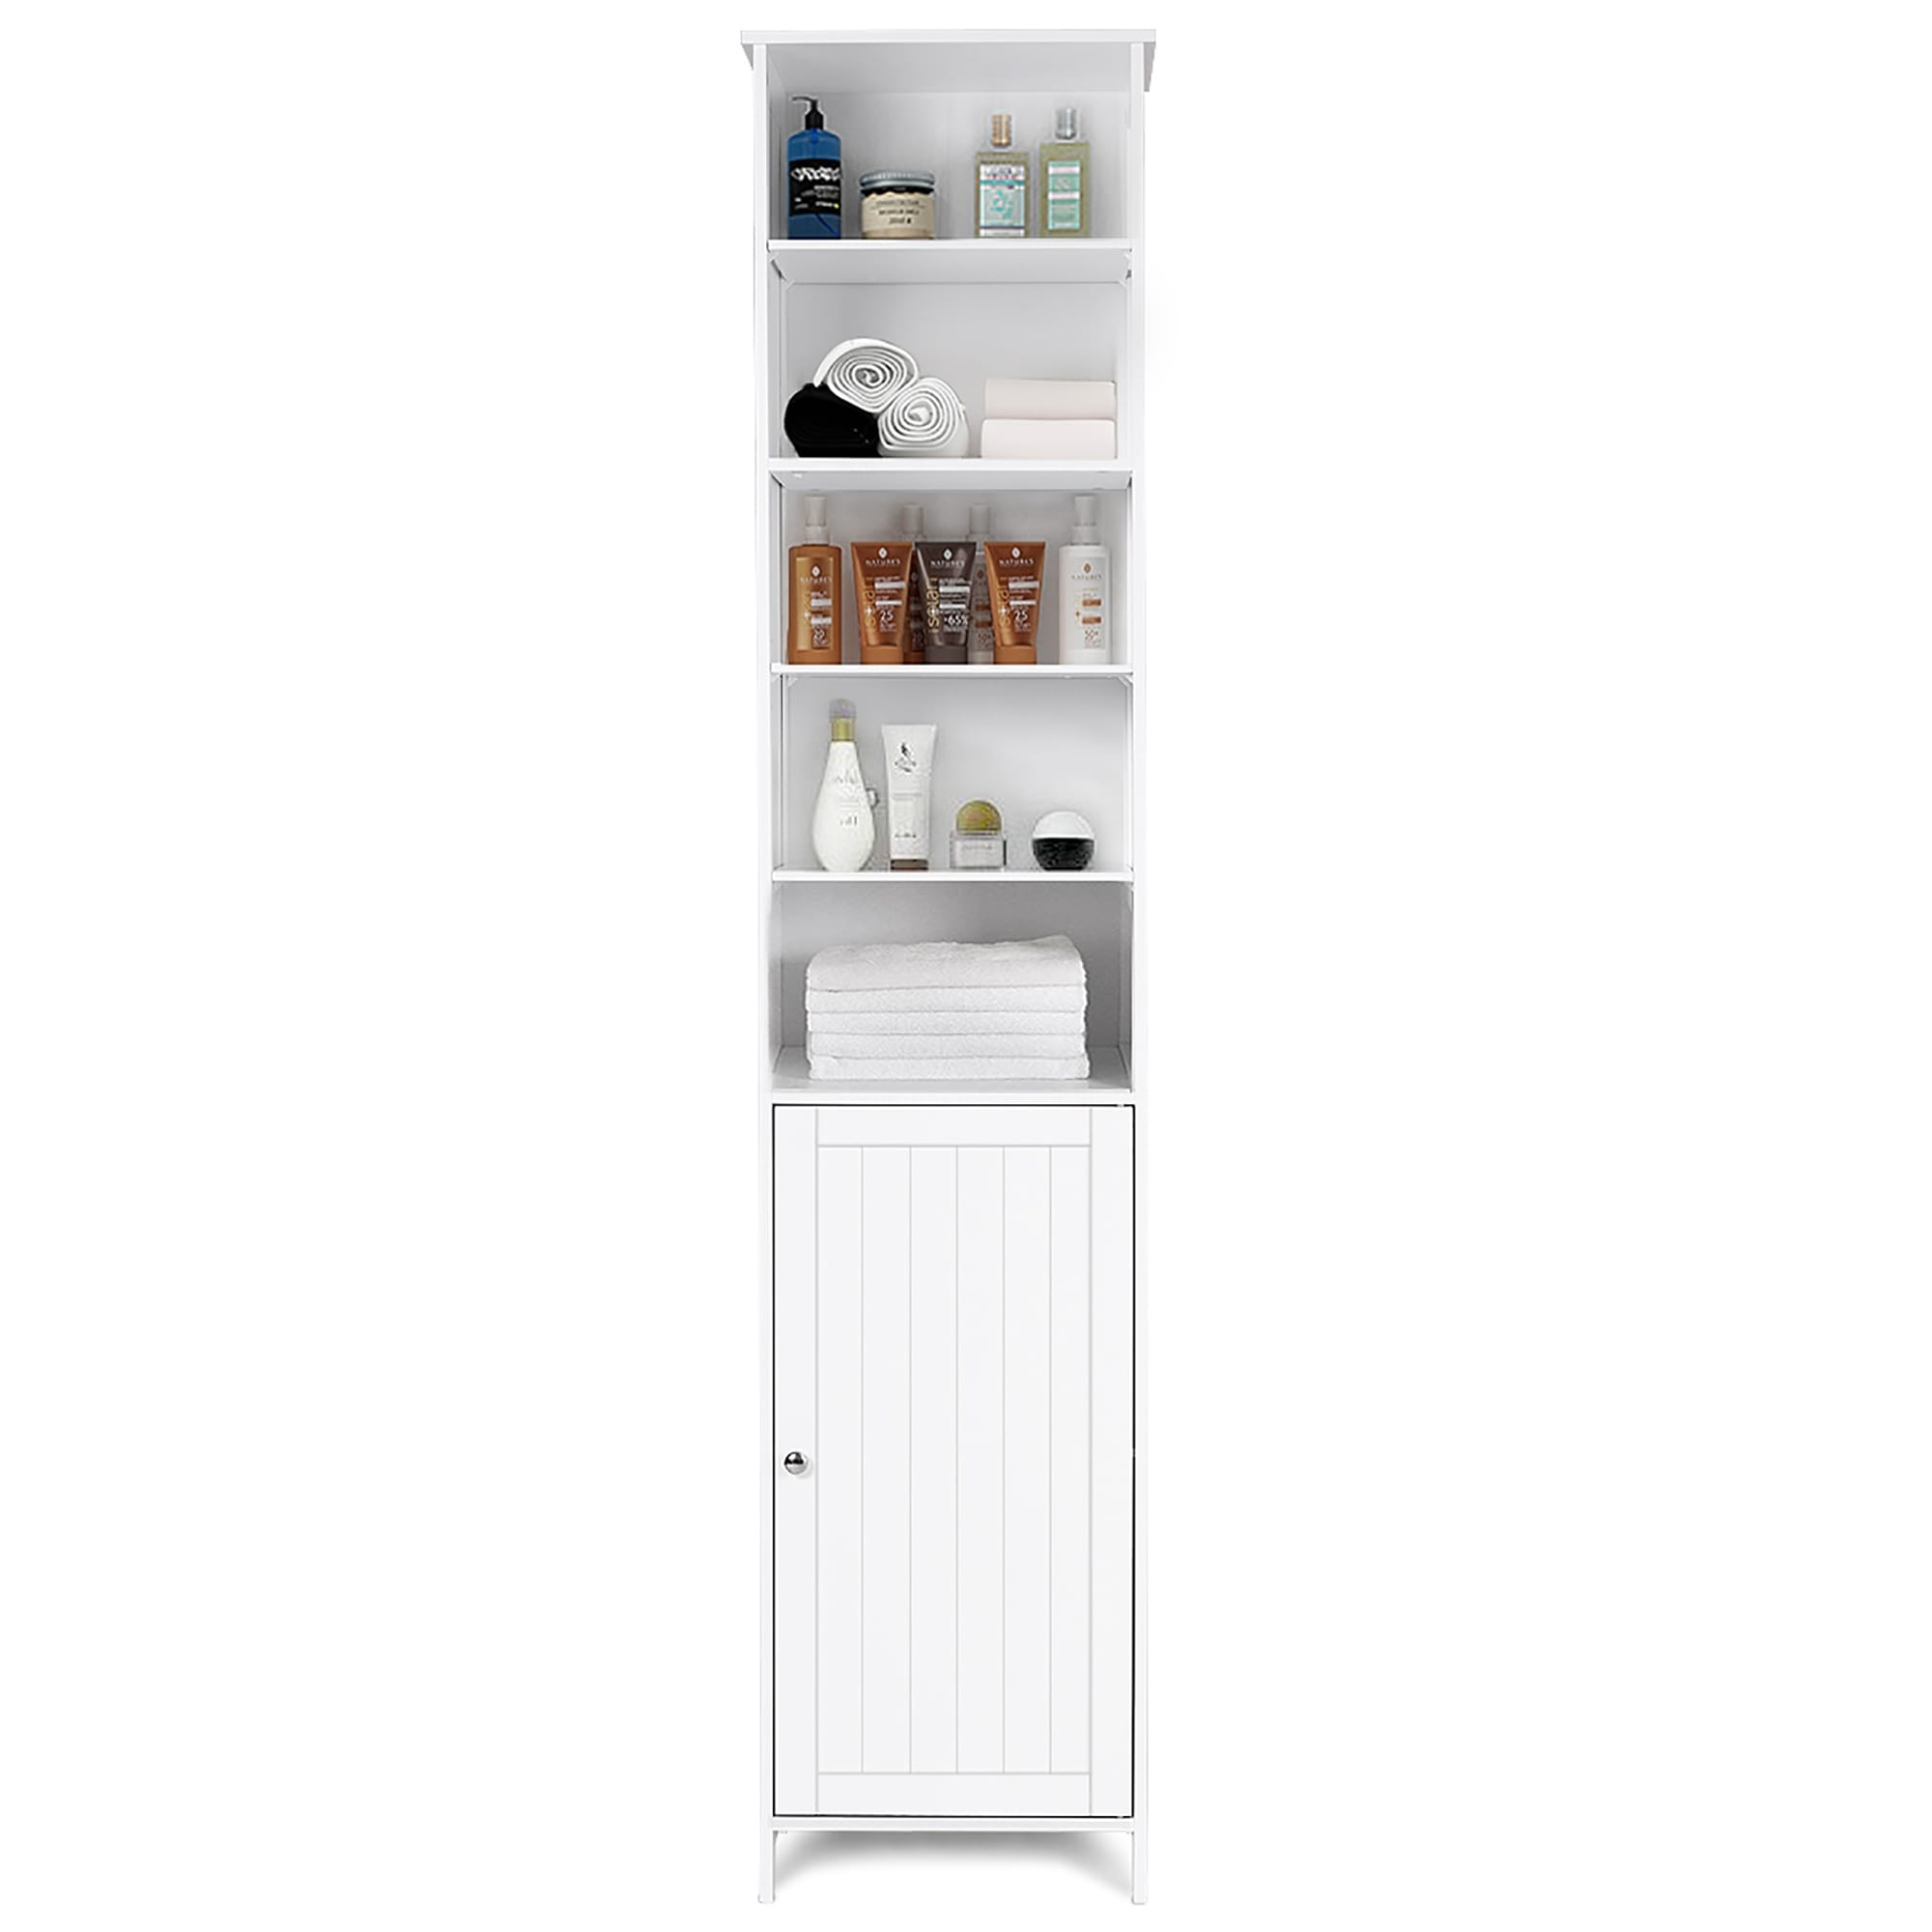 https://ak1.ostkcdn.com/images/products/is/images/direct/15677cbeec8577df4a5468d3da5e59aa701d8714/72-Inches-Tall-Cabinet-Bathroom-Free-Standing-Tower-Cabinet.jpg